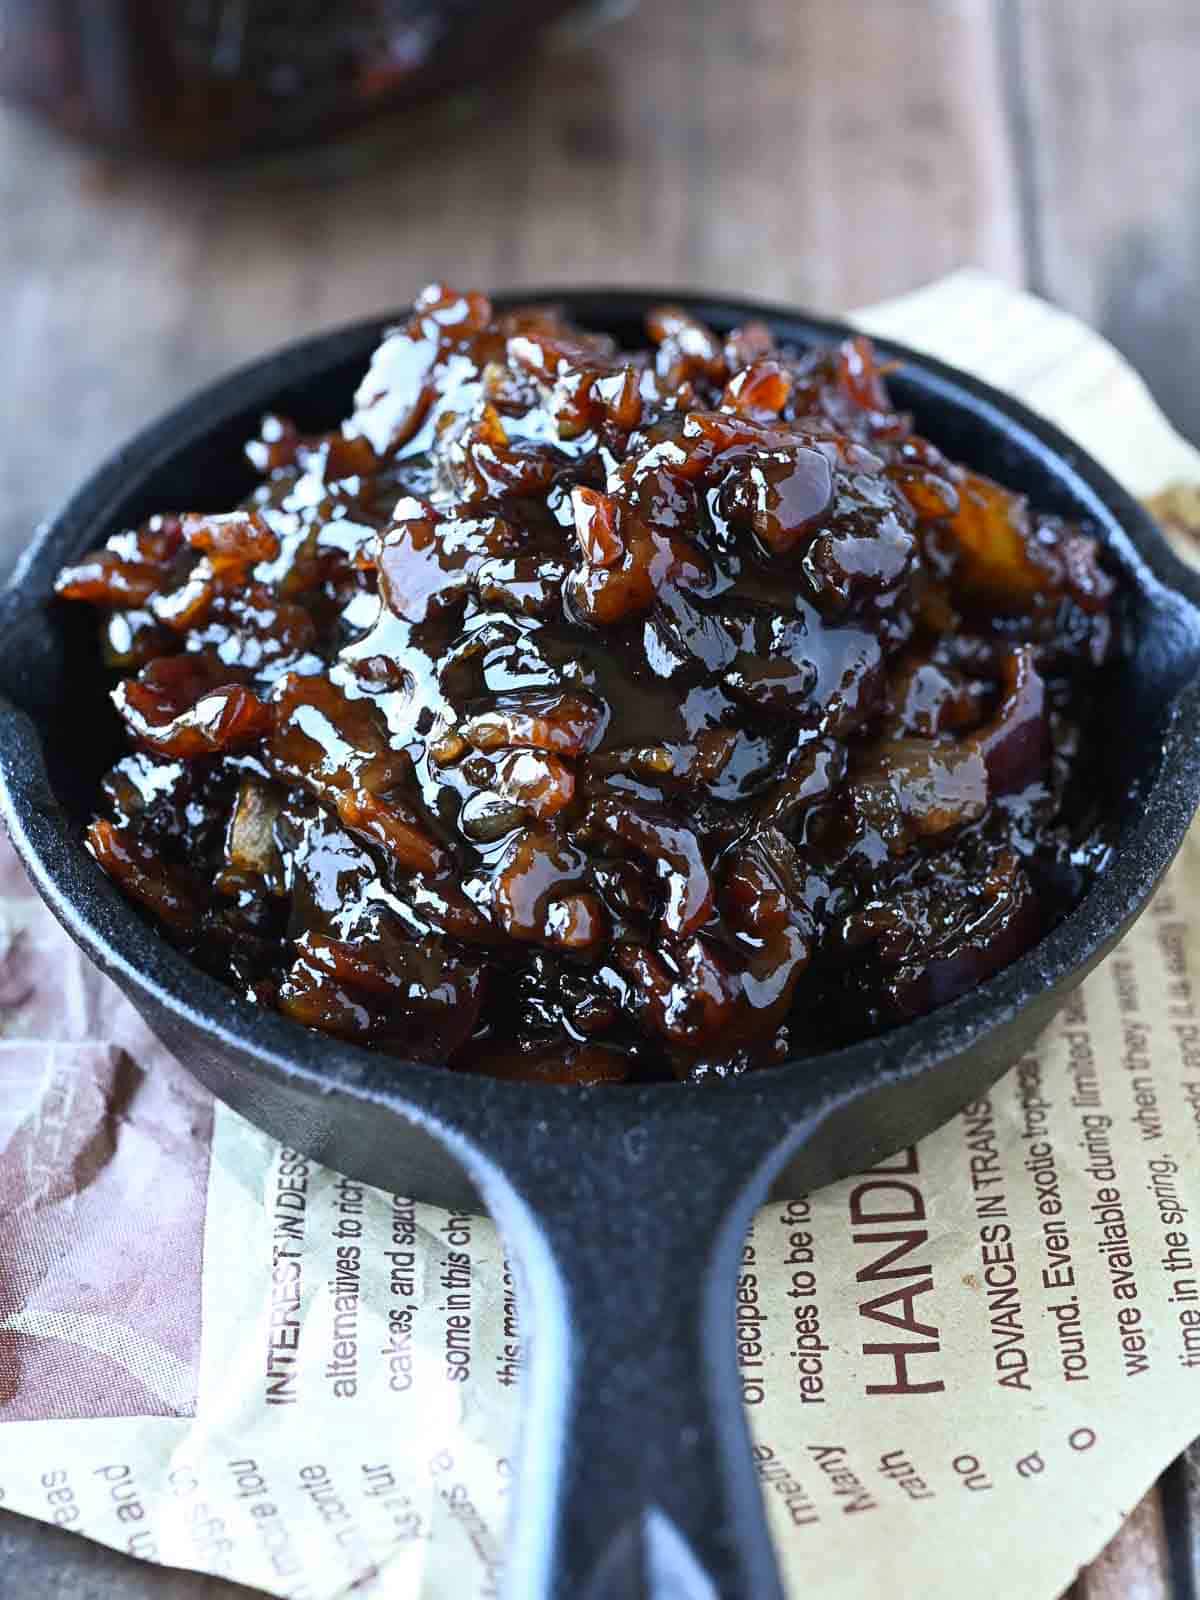 Bourbon bacon jam in a small back skillet.